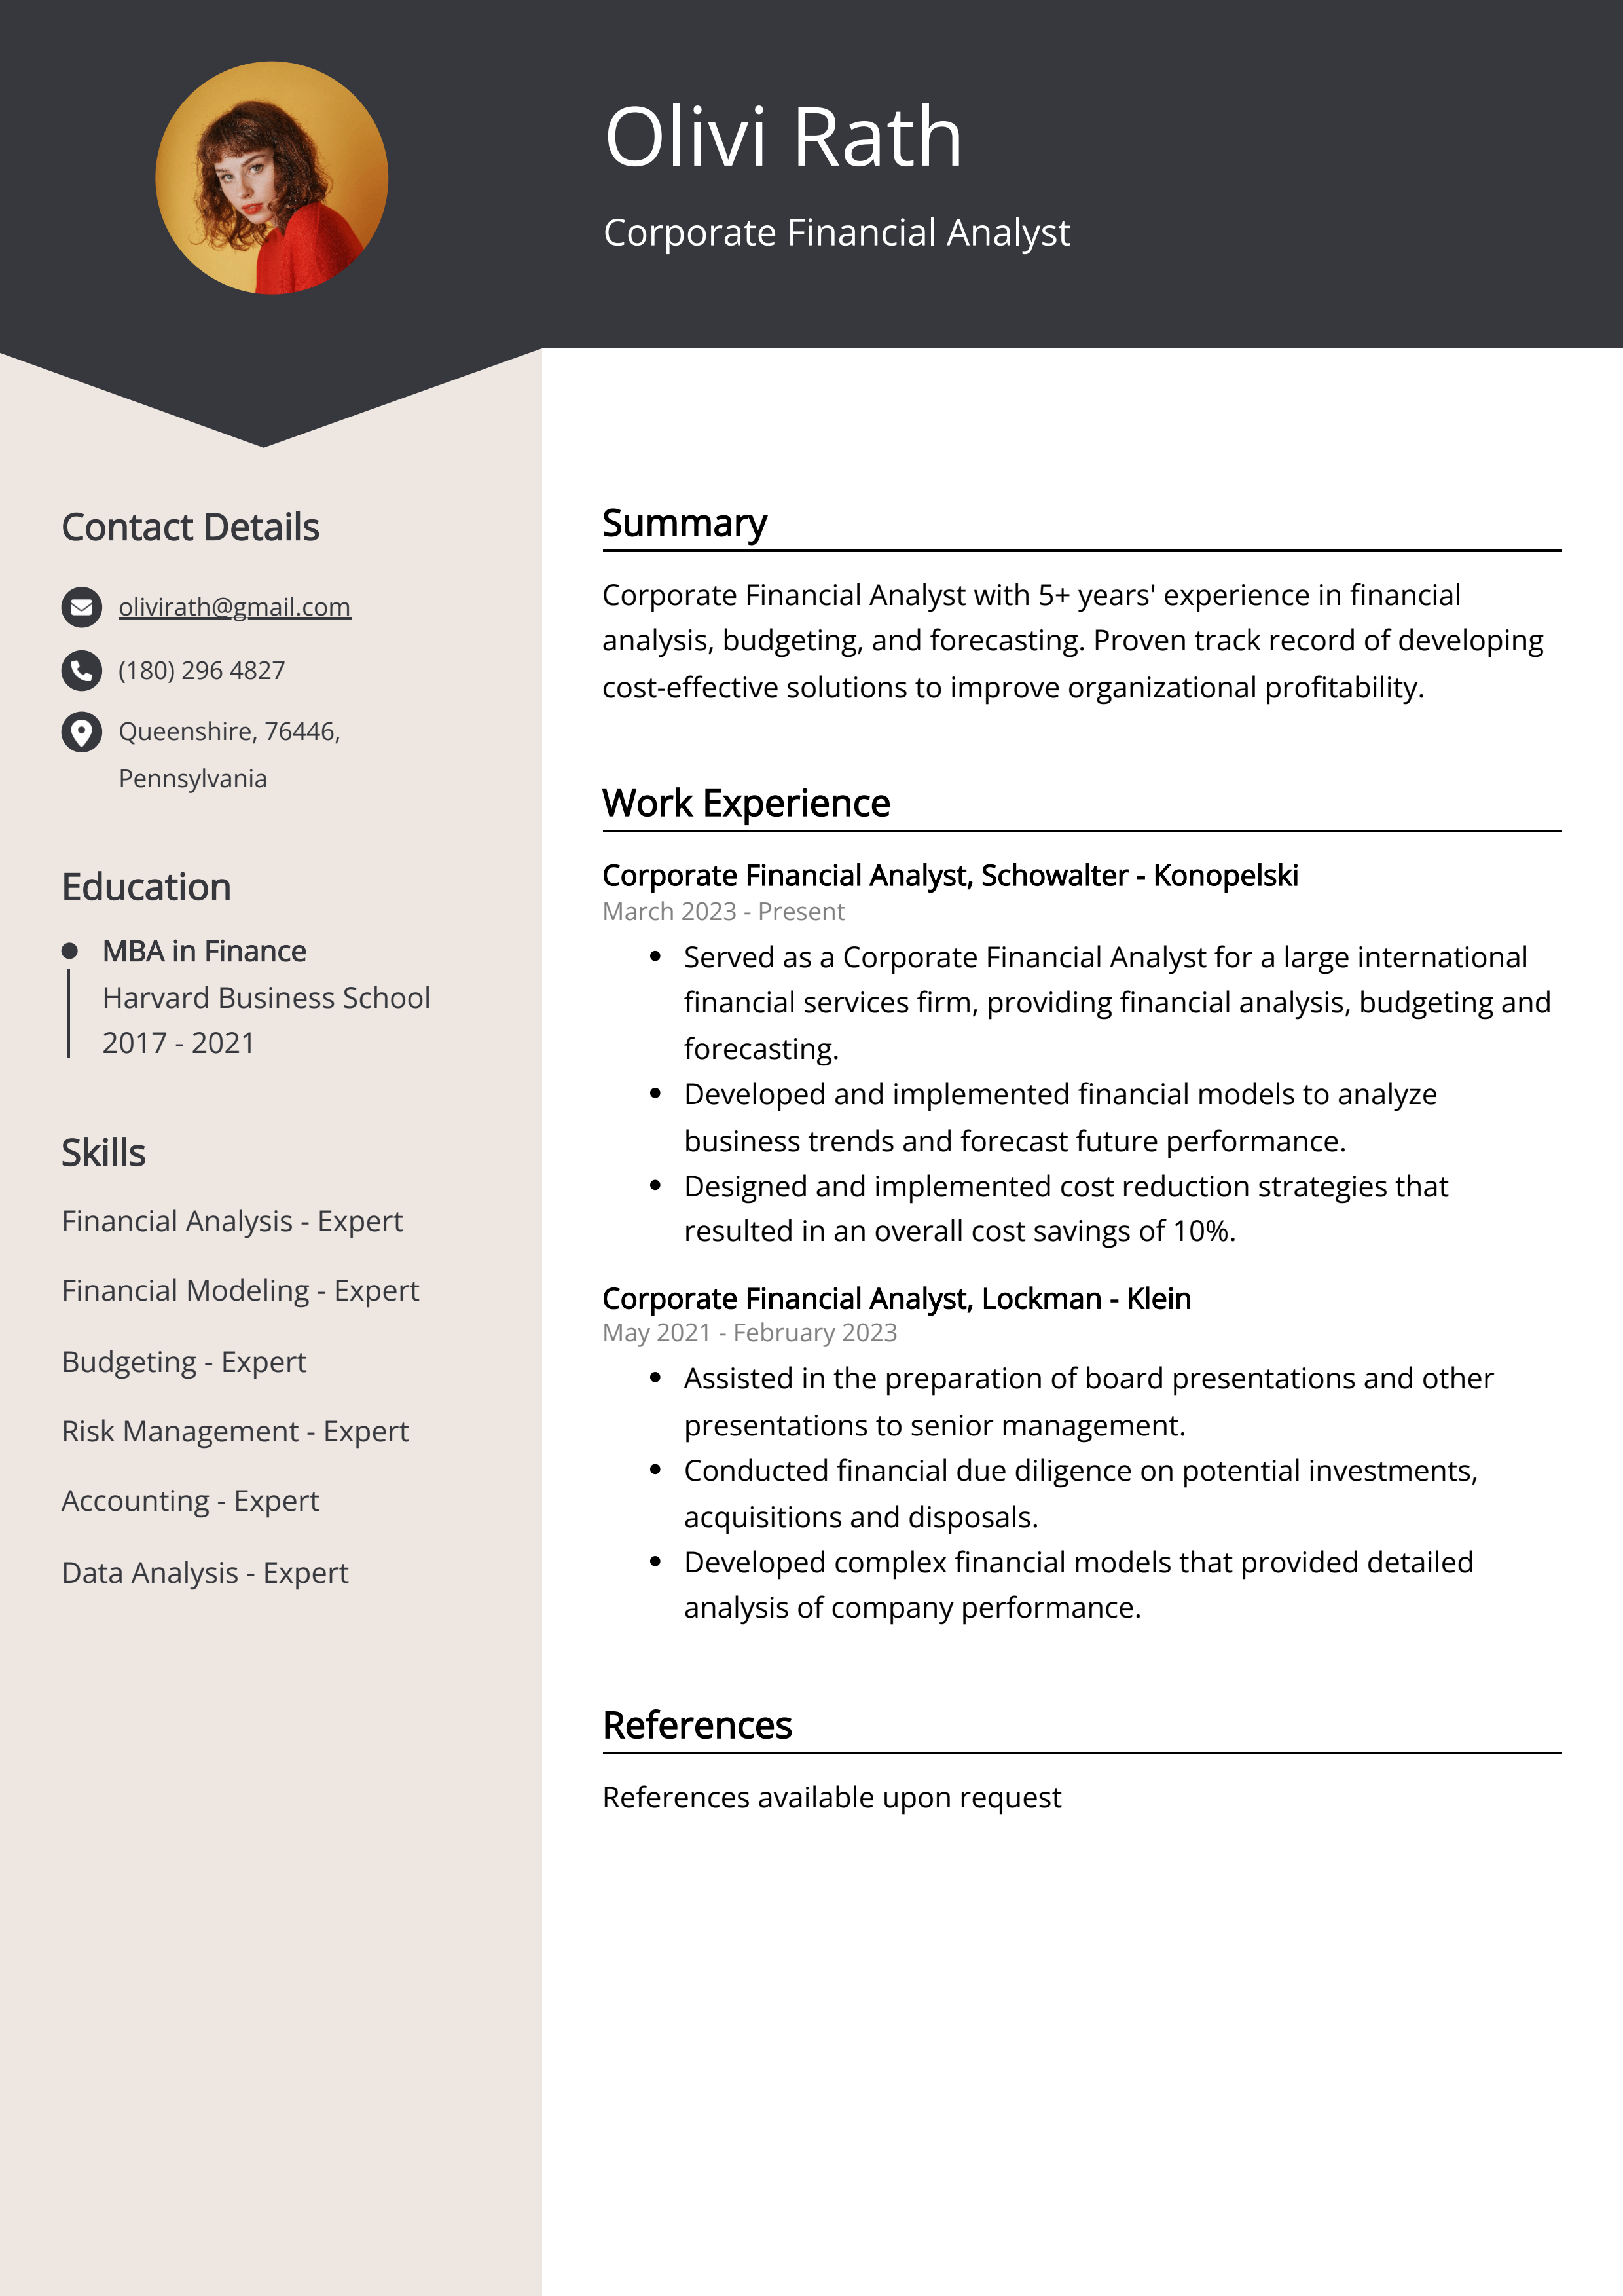 Corporate Financial Analyst CV Example